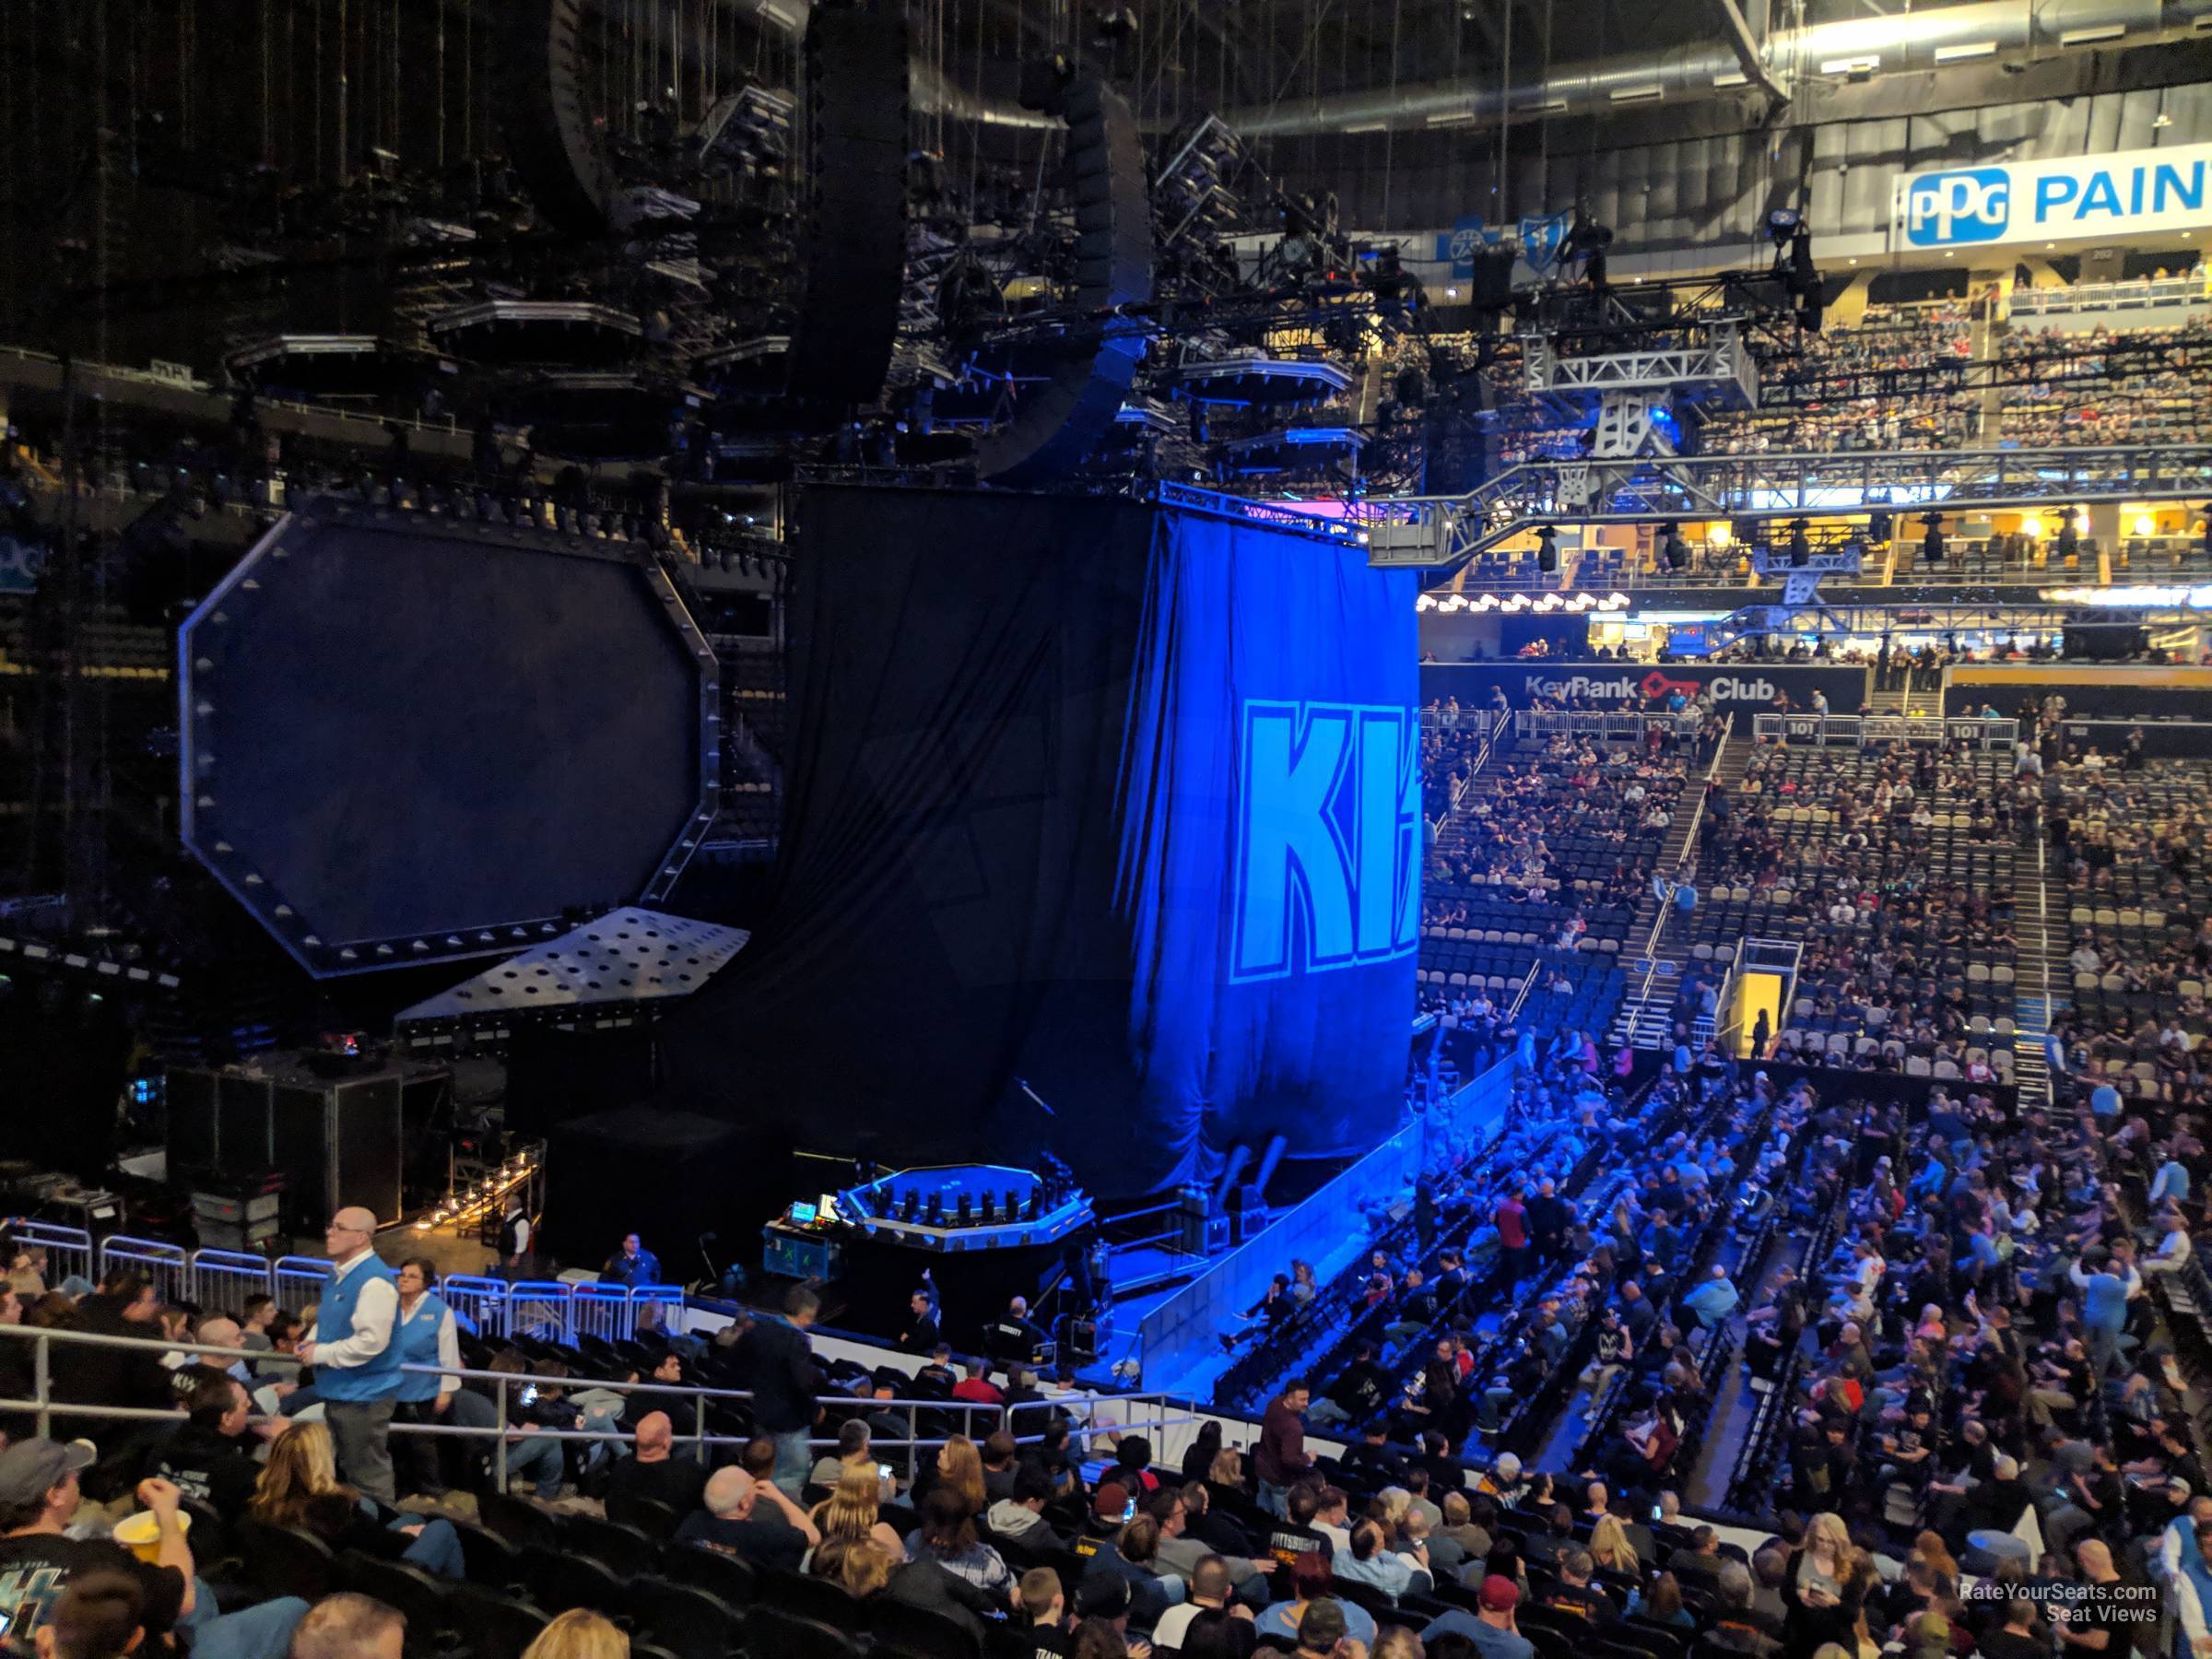 section 113, row n seat view  for concert - ppg paints arena